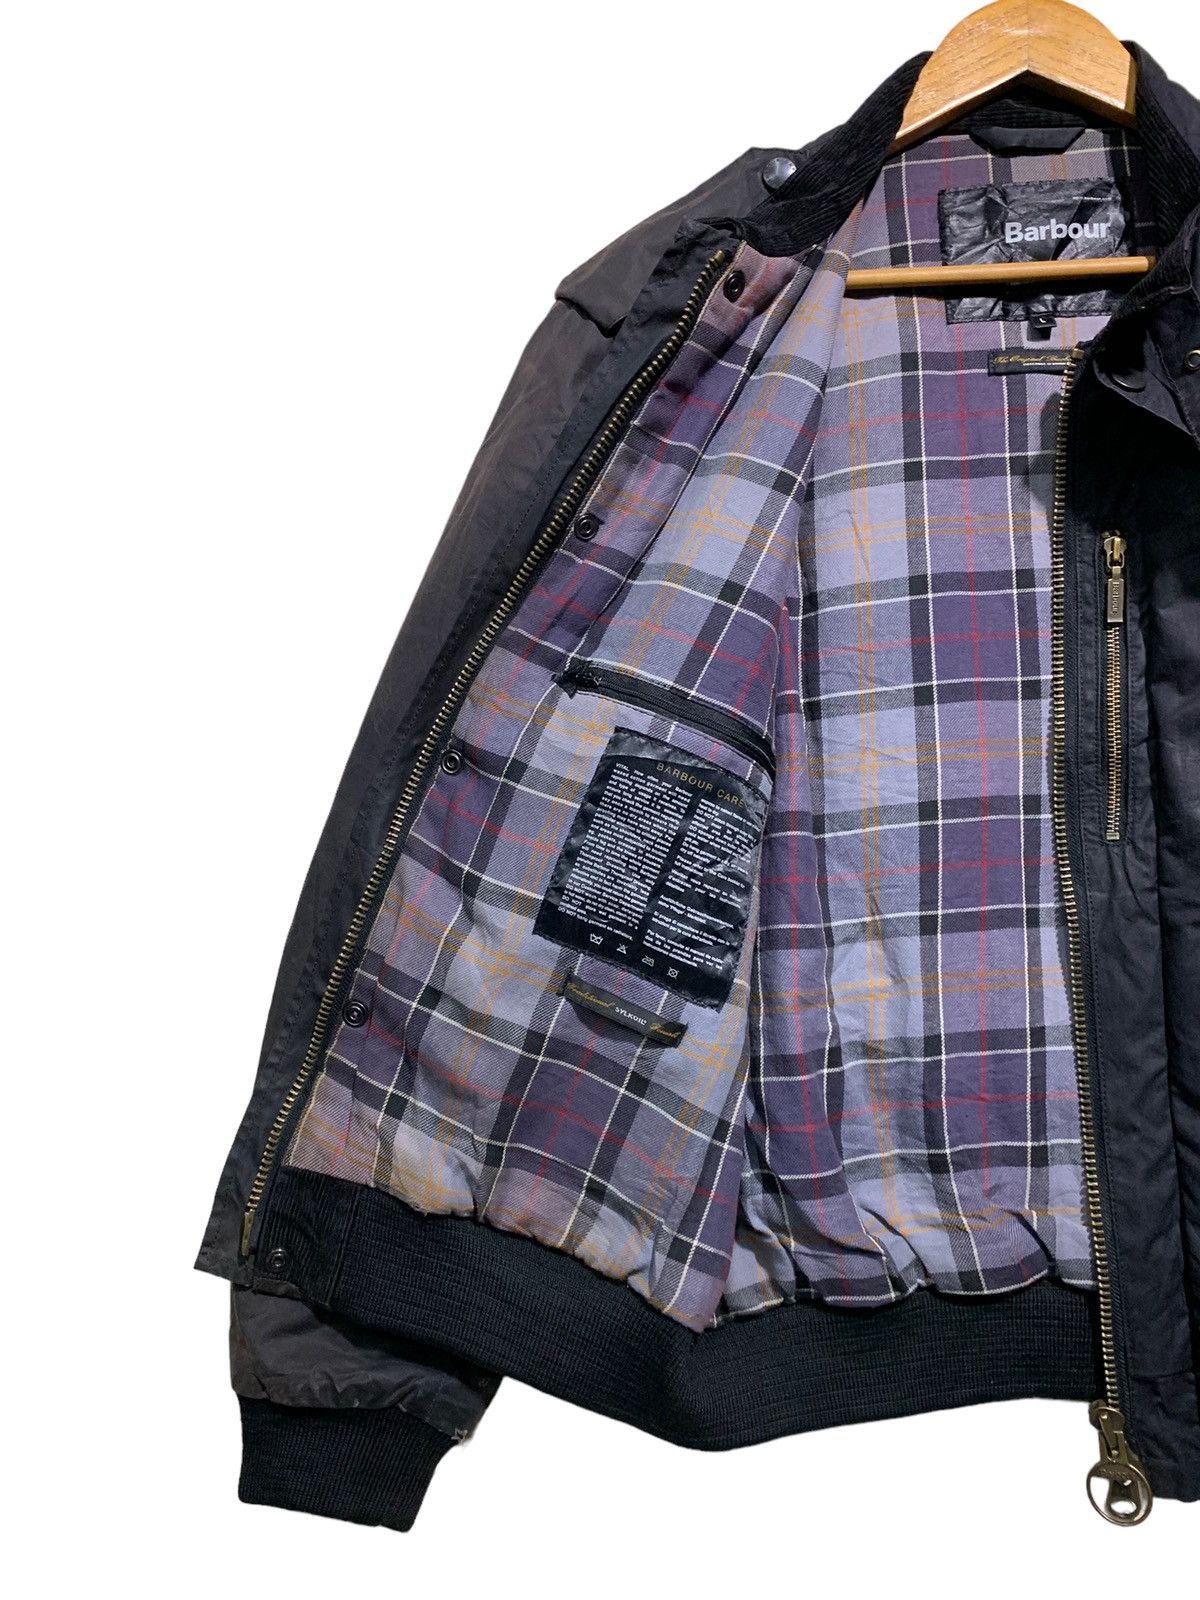 🔥BARBOUR INTERNATIONAL WAXED BOMBER JACKETS - 9